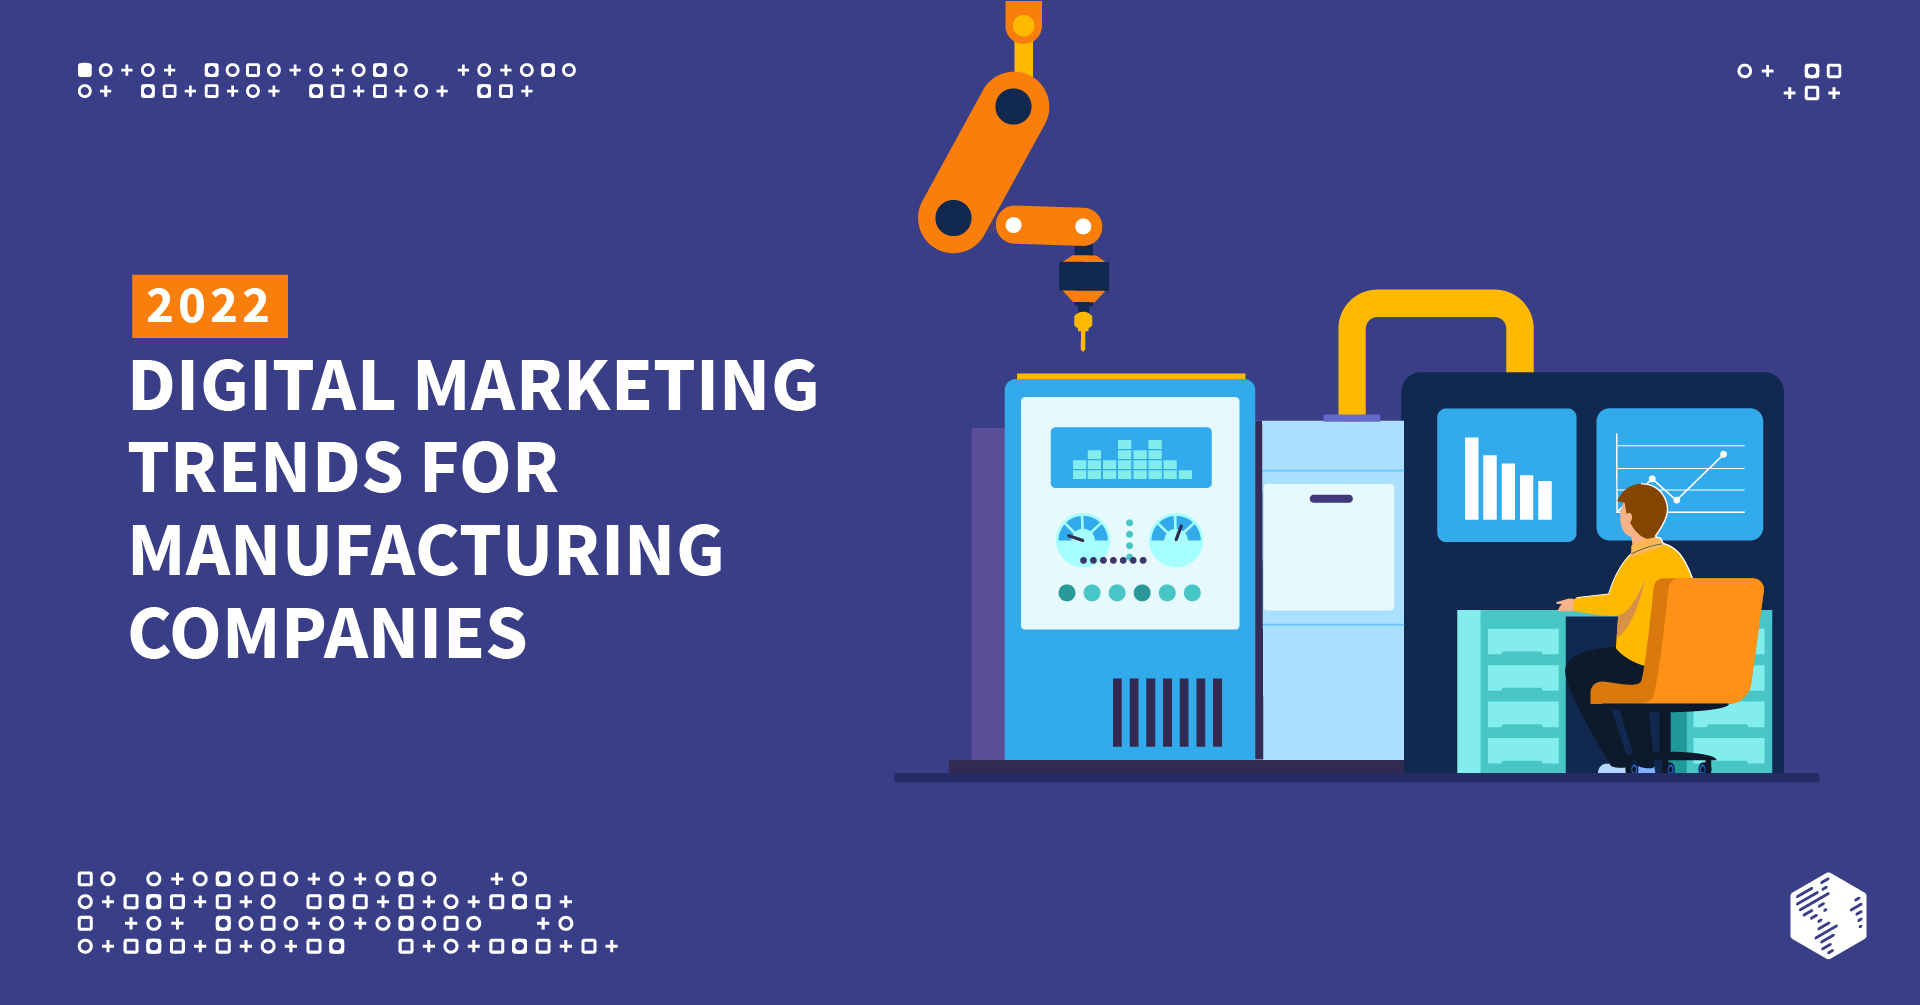 2022 Digital Marketing Trends for Manufacturing Companies